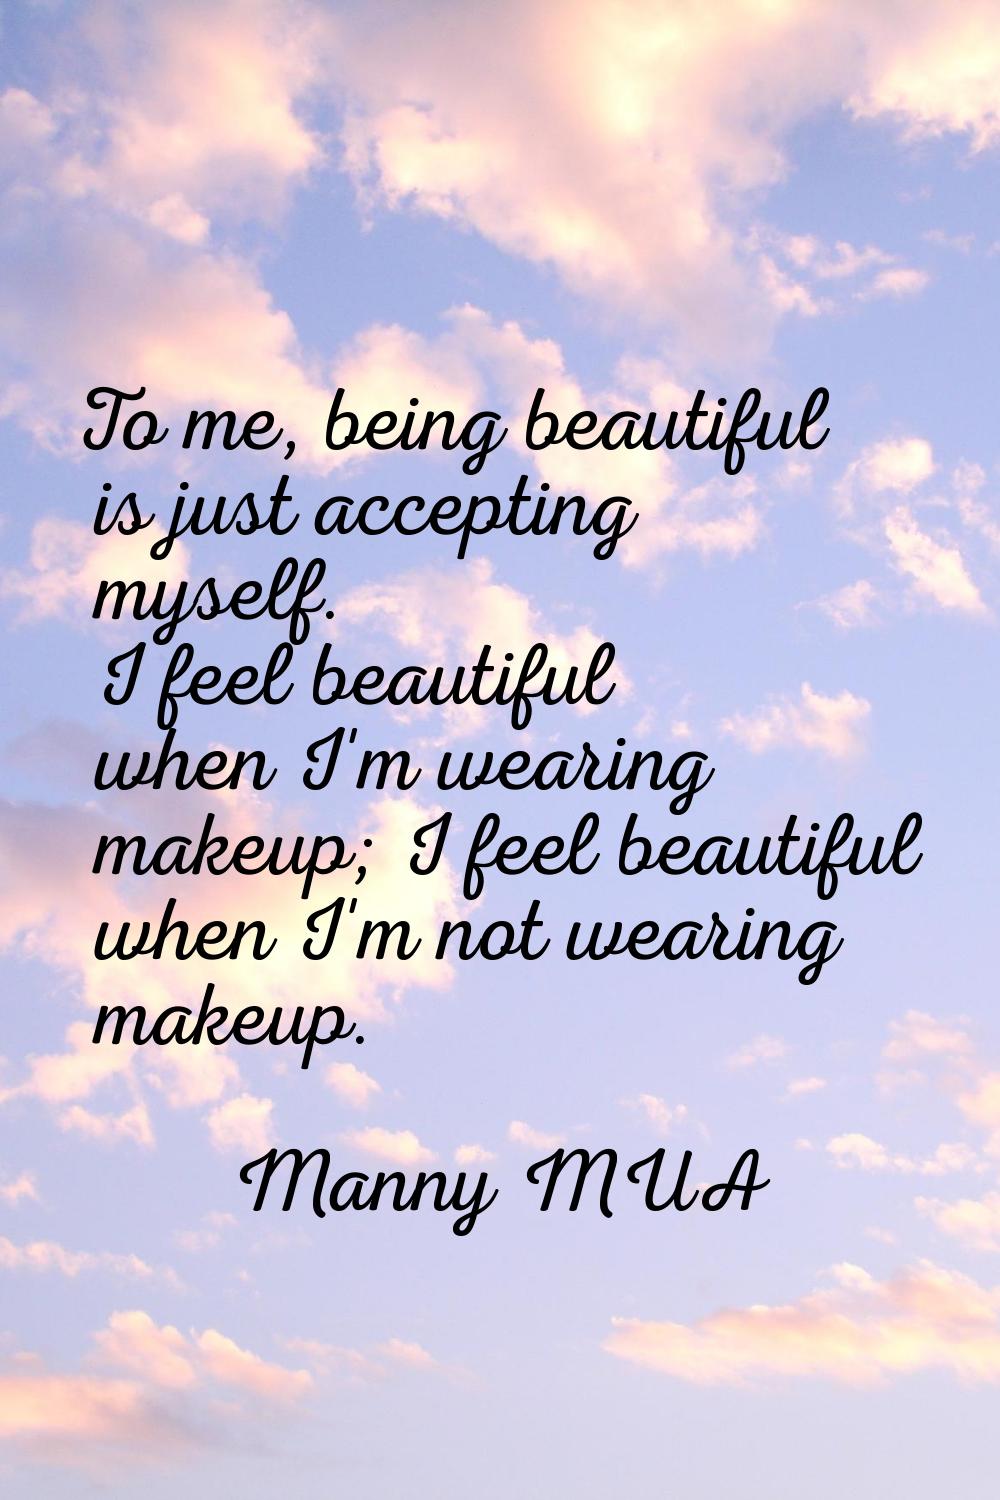 To me, being beautiful is just accepting myself. I feel beautiful when I'm wearing makeup; I feel b